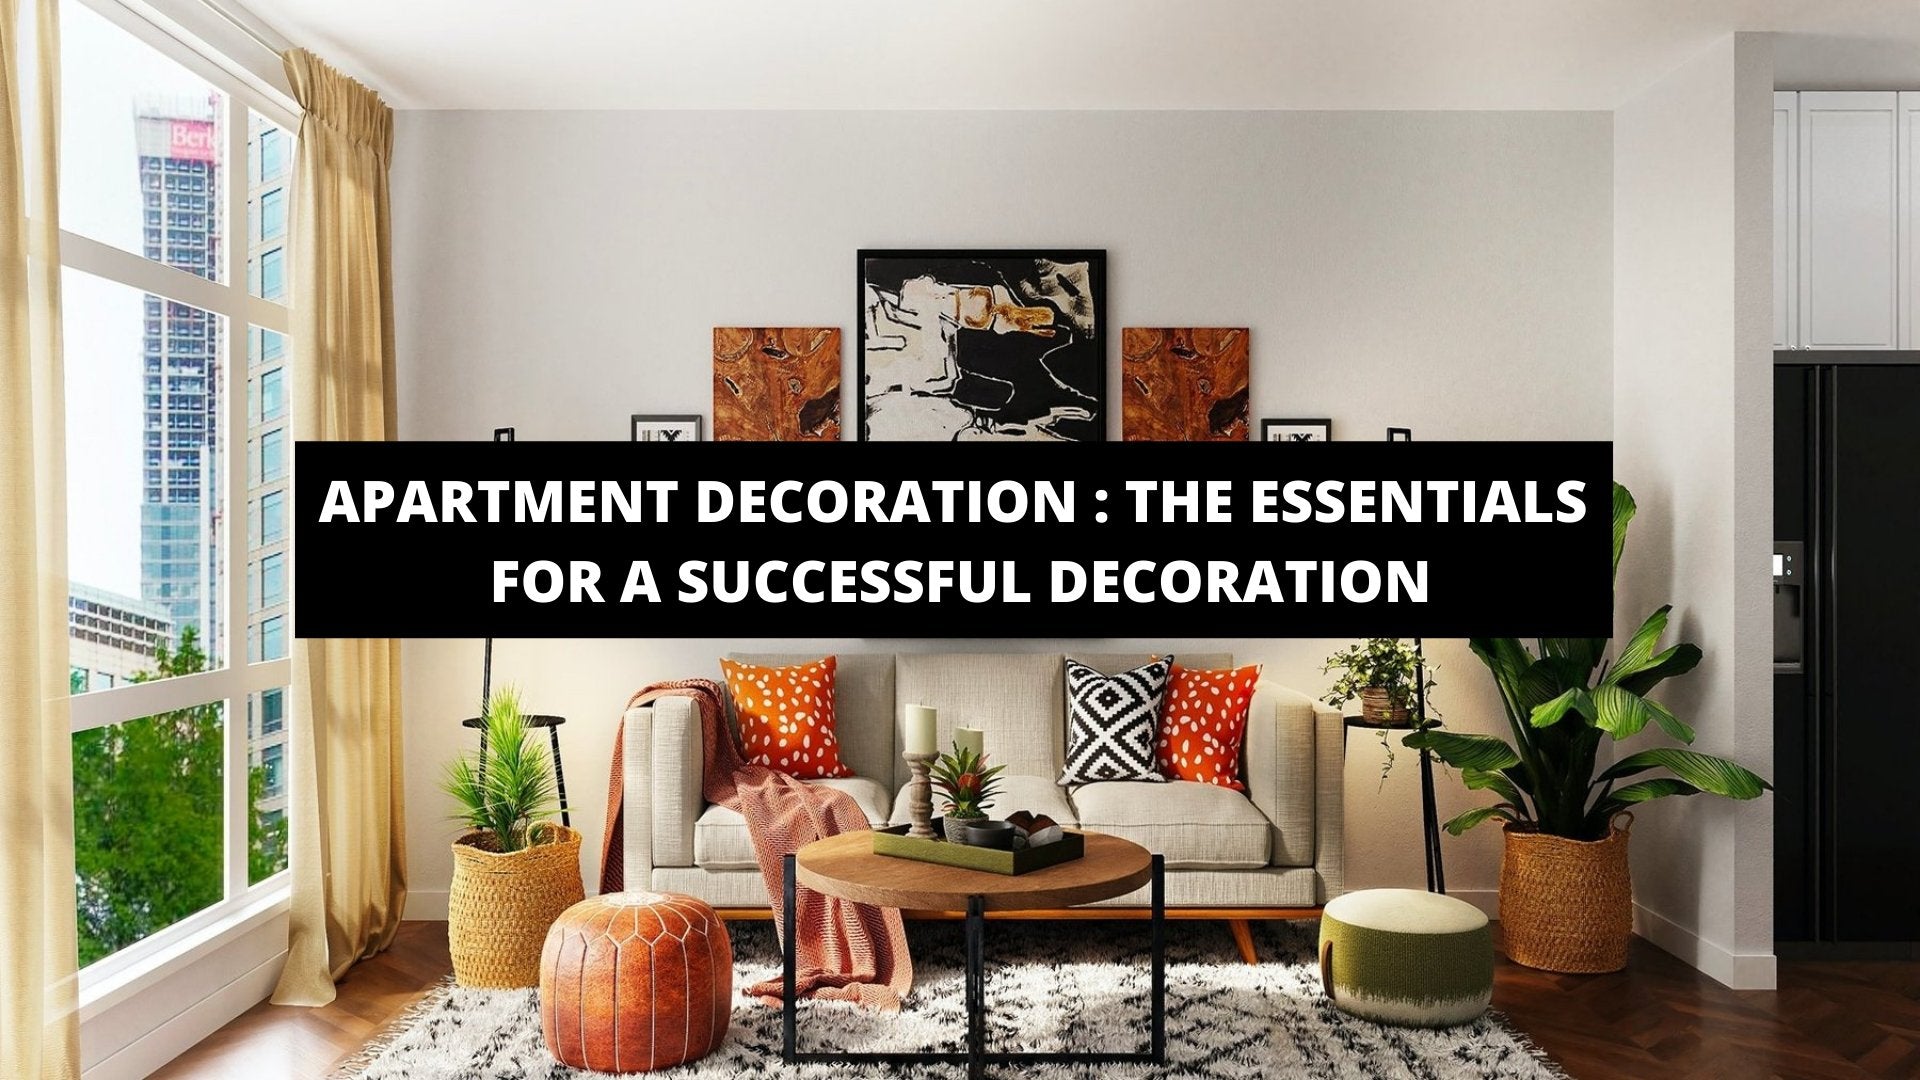 Apartment Decoration: The Essentials for a Successful Decoration - The Trendy Art